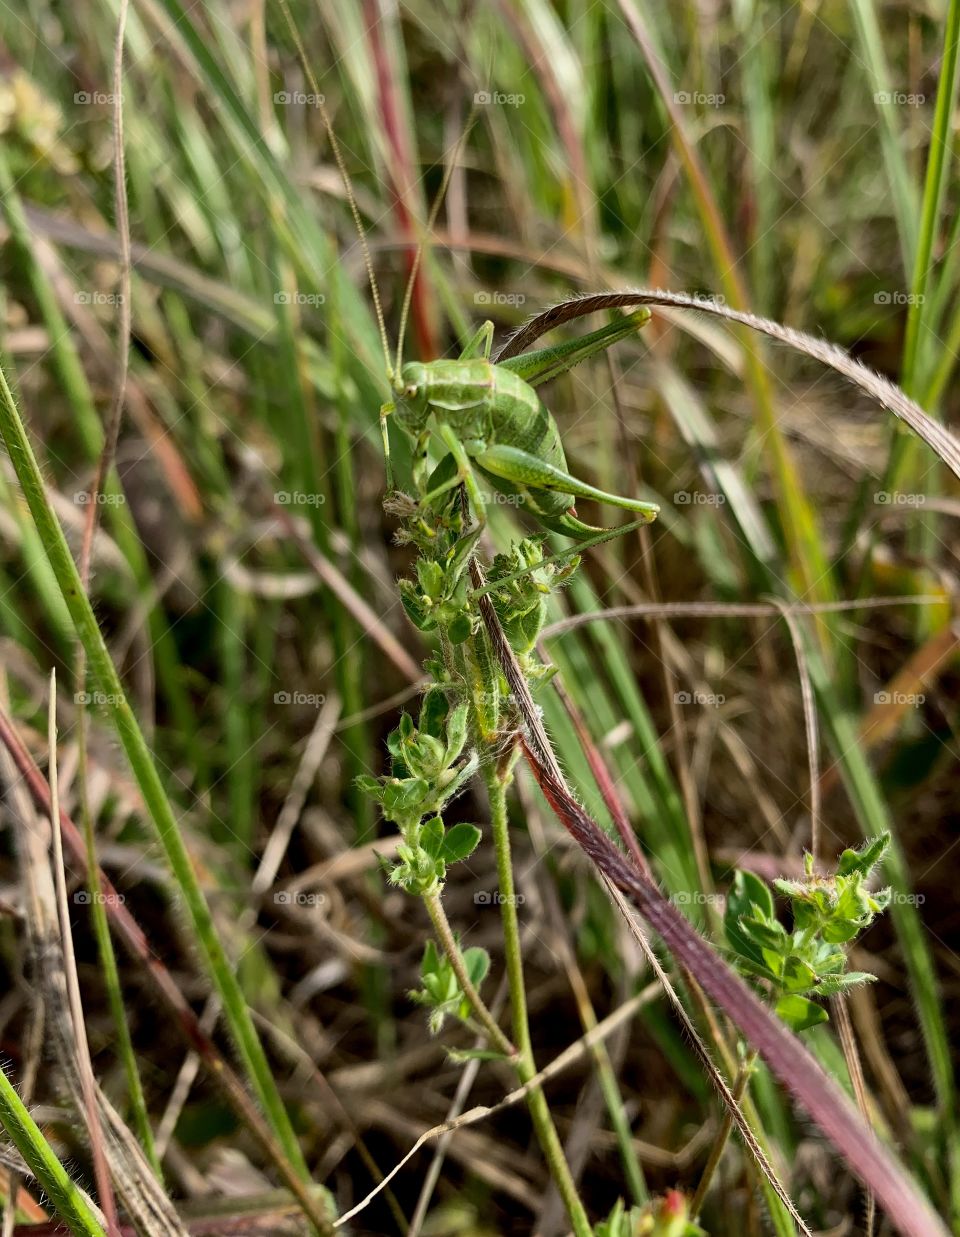 Green grasshopper imperceptibly hid in the grass